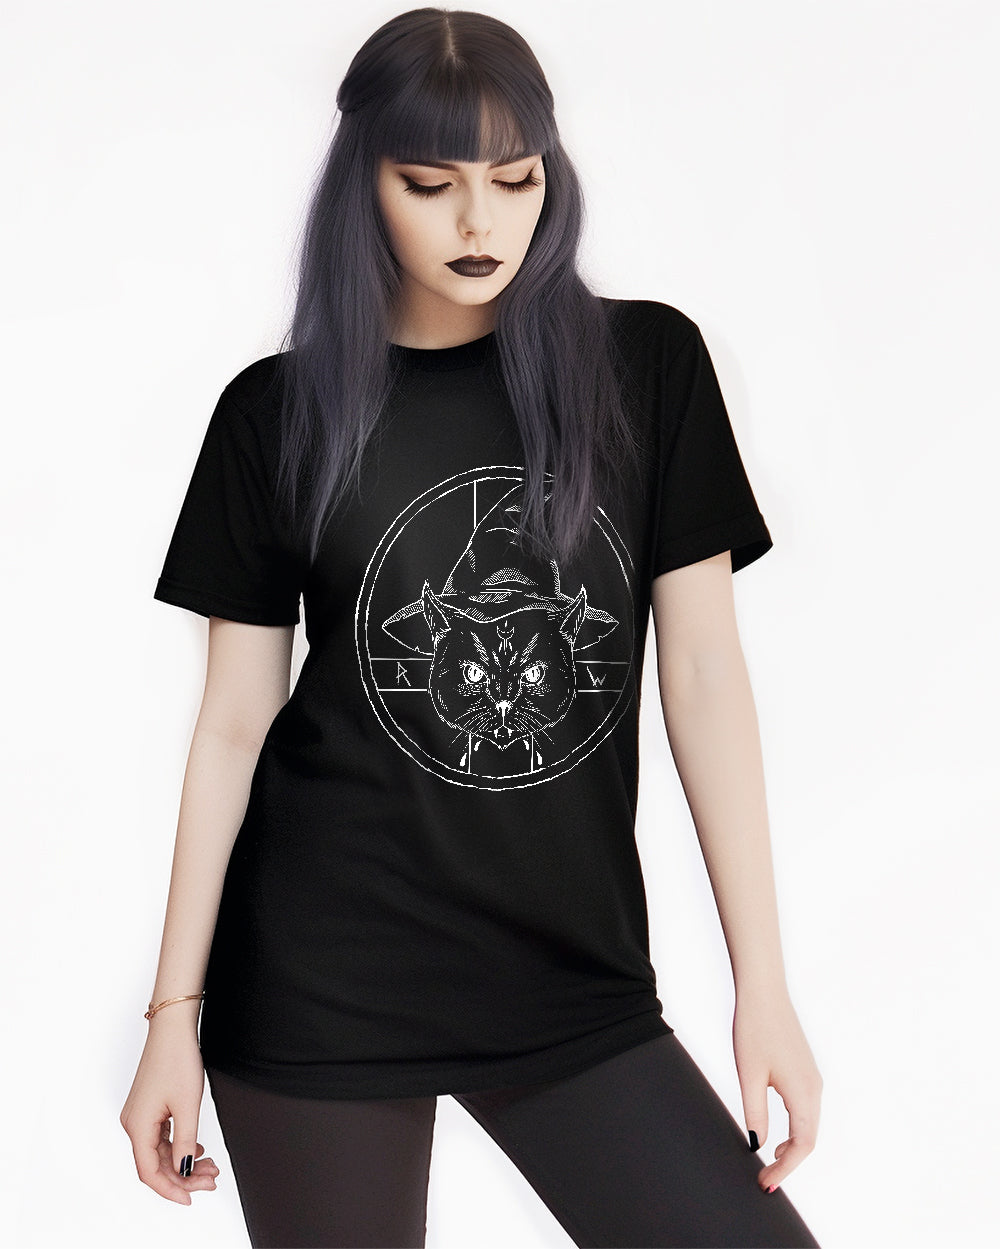 Purrfect Witchery Short Sleeve Tee - For Cat Lovers & Shamans!  - Unisex Vegan Gothic Clothing - Alternative Occult Ethical Fashion - On Demand Eco-friendly Sustainable Product